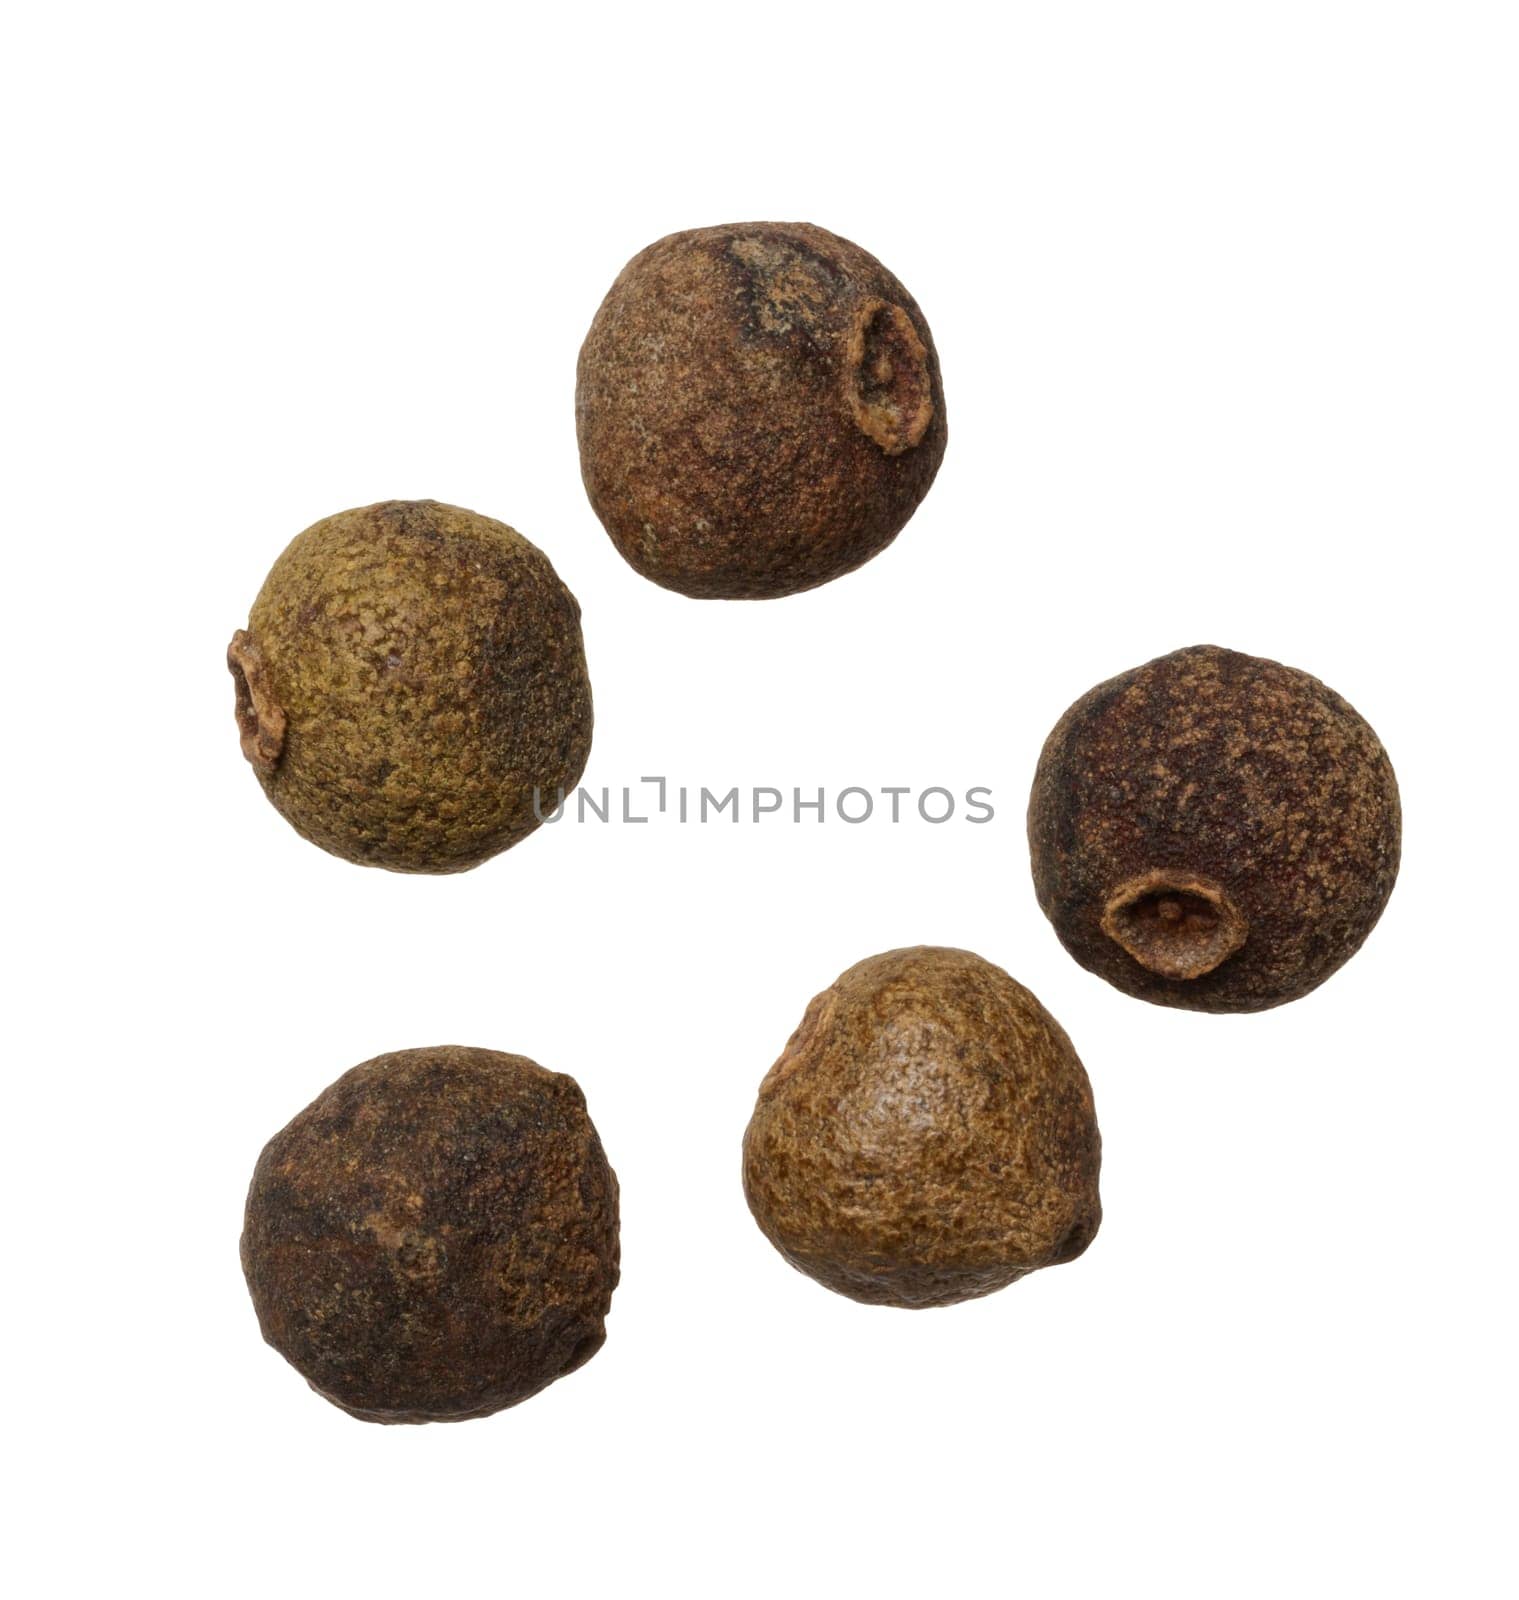 Dry allspice peas on isolated background, top view. Cooking spice